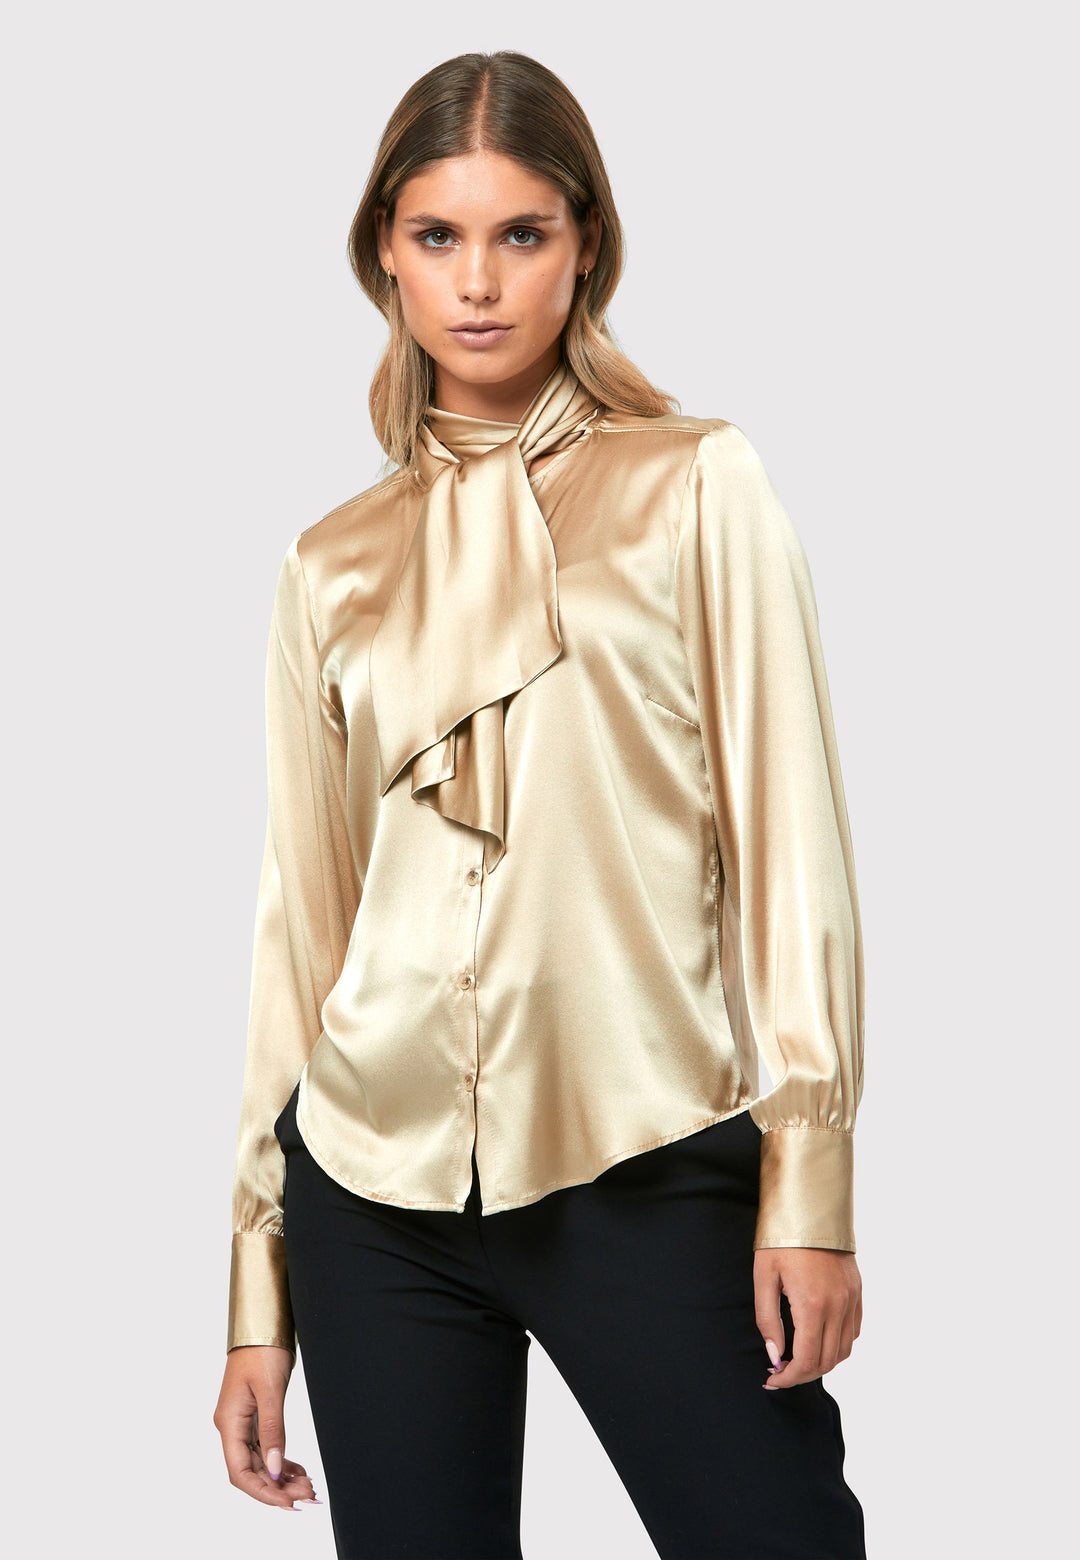  Crafted from a silk blend, it offers a luxurious feel against your skin. The button-down style pussy-bow neckline shirt.